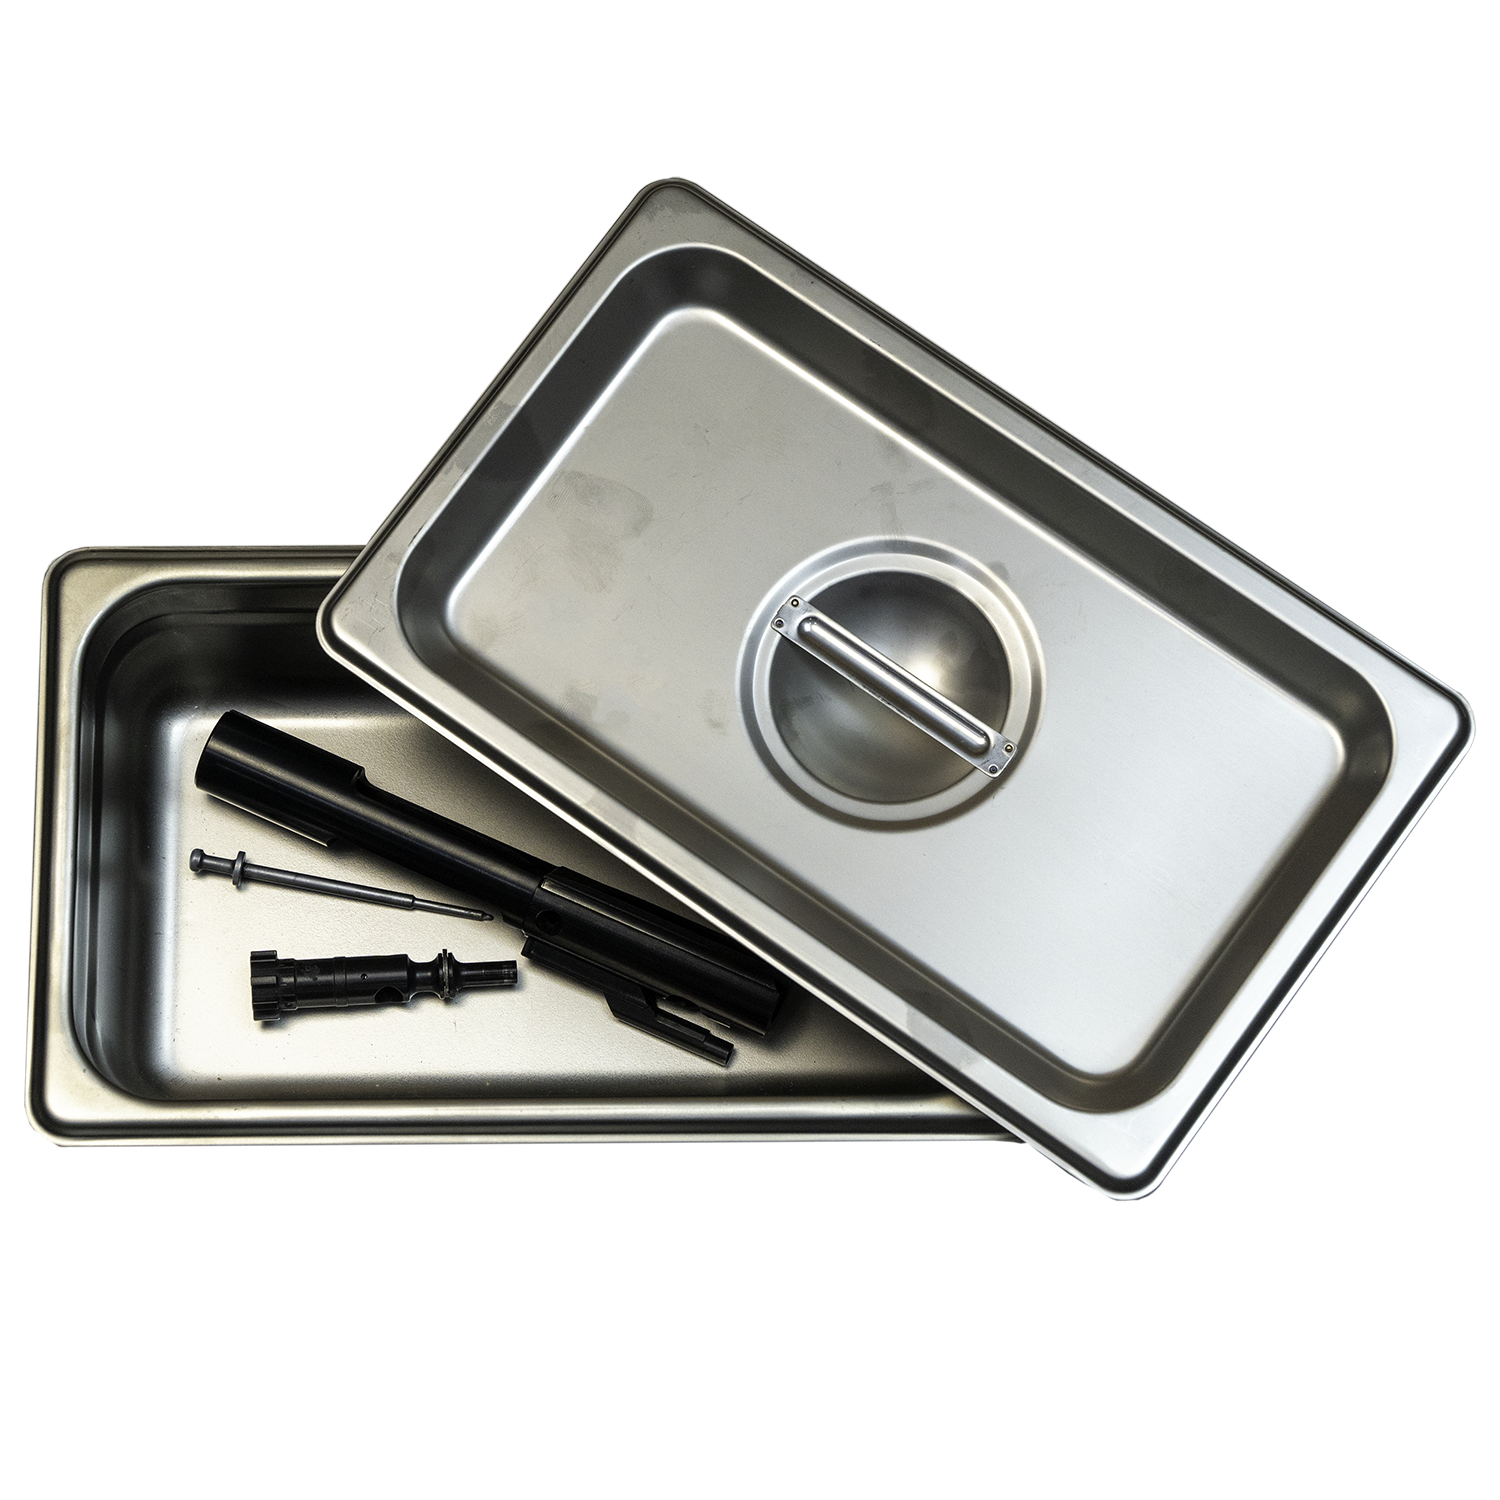 BACK IN STOCK - Stainless Steel Tray